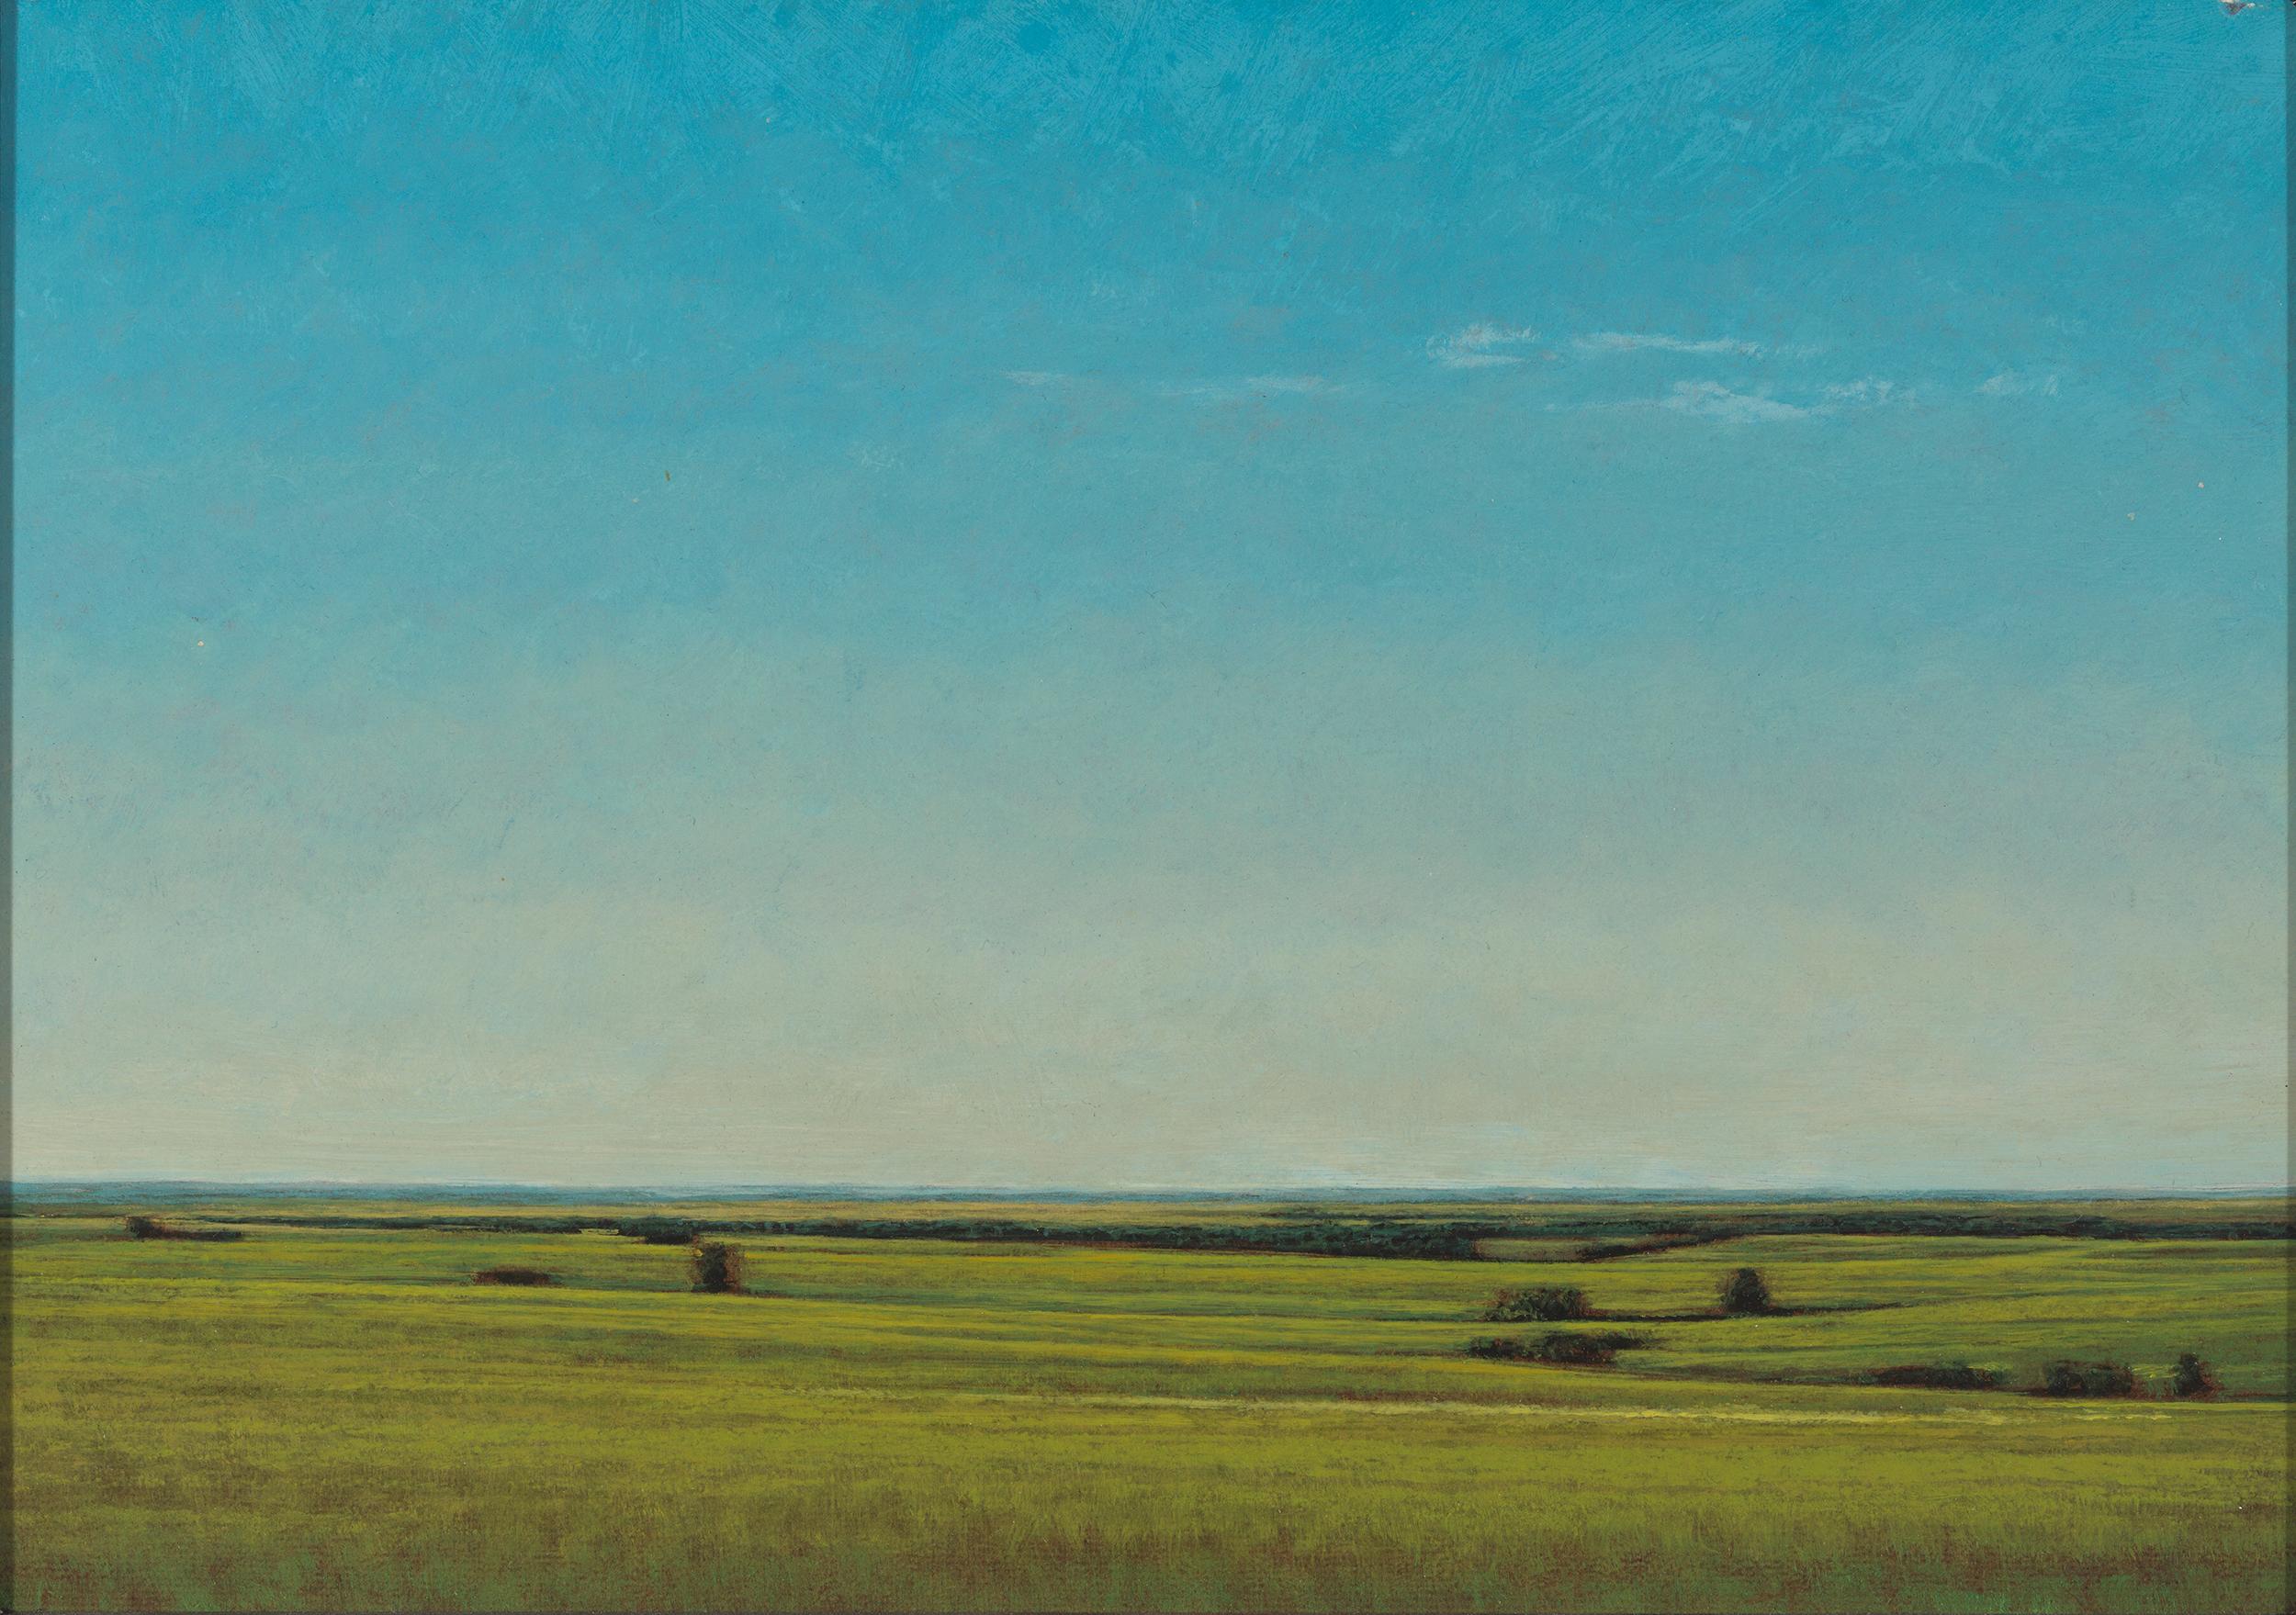 Late Afternoon Near Salina, Kansas, Serene Landscape with Lush Greens & Blues - Painting by Jeff Aeling